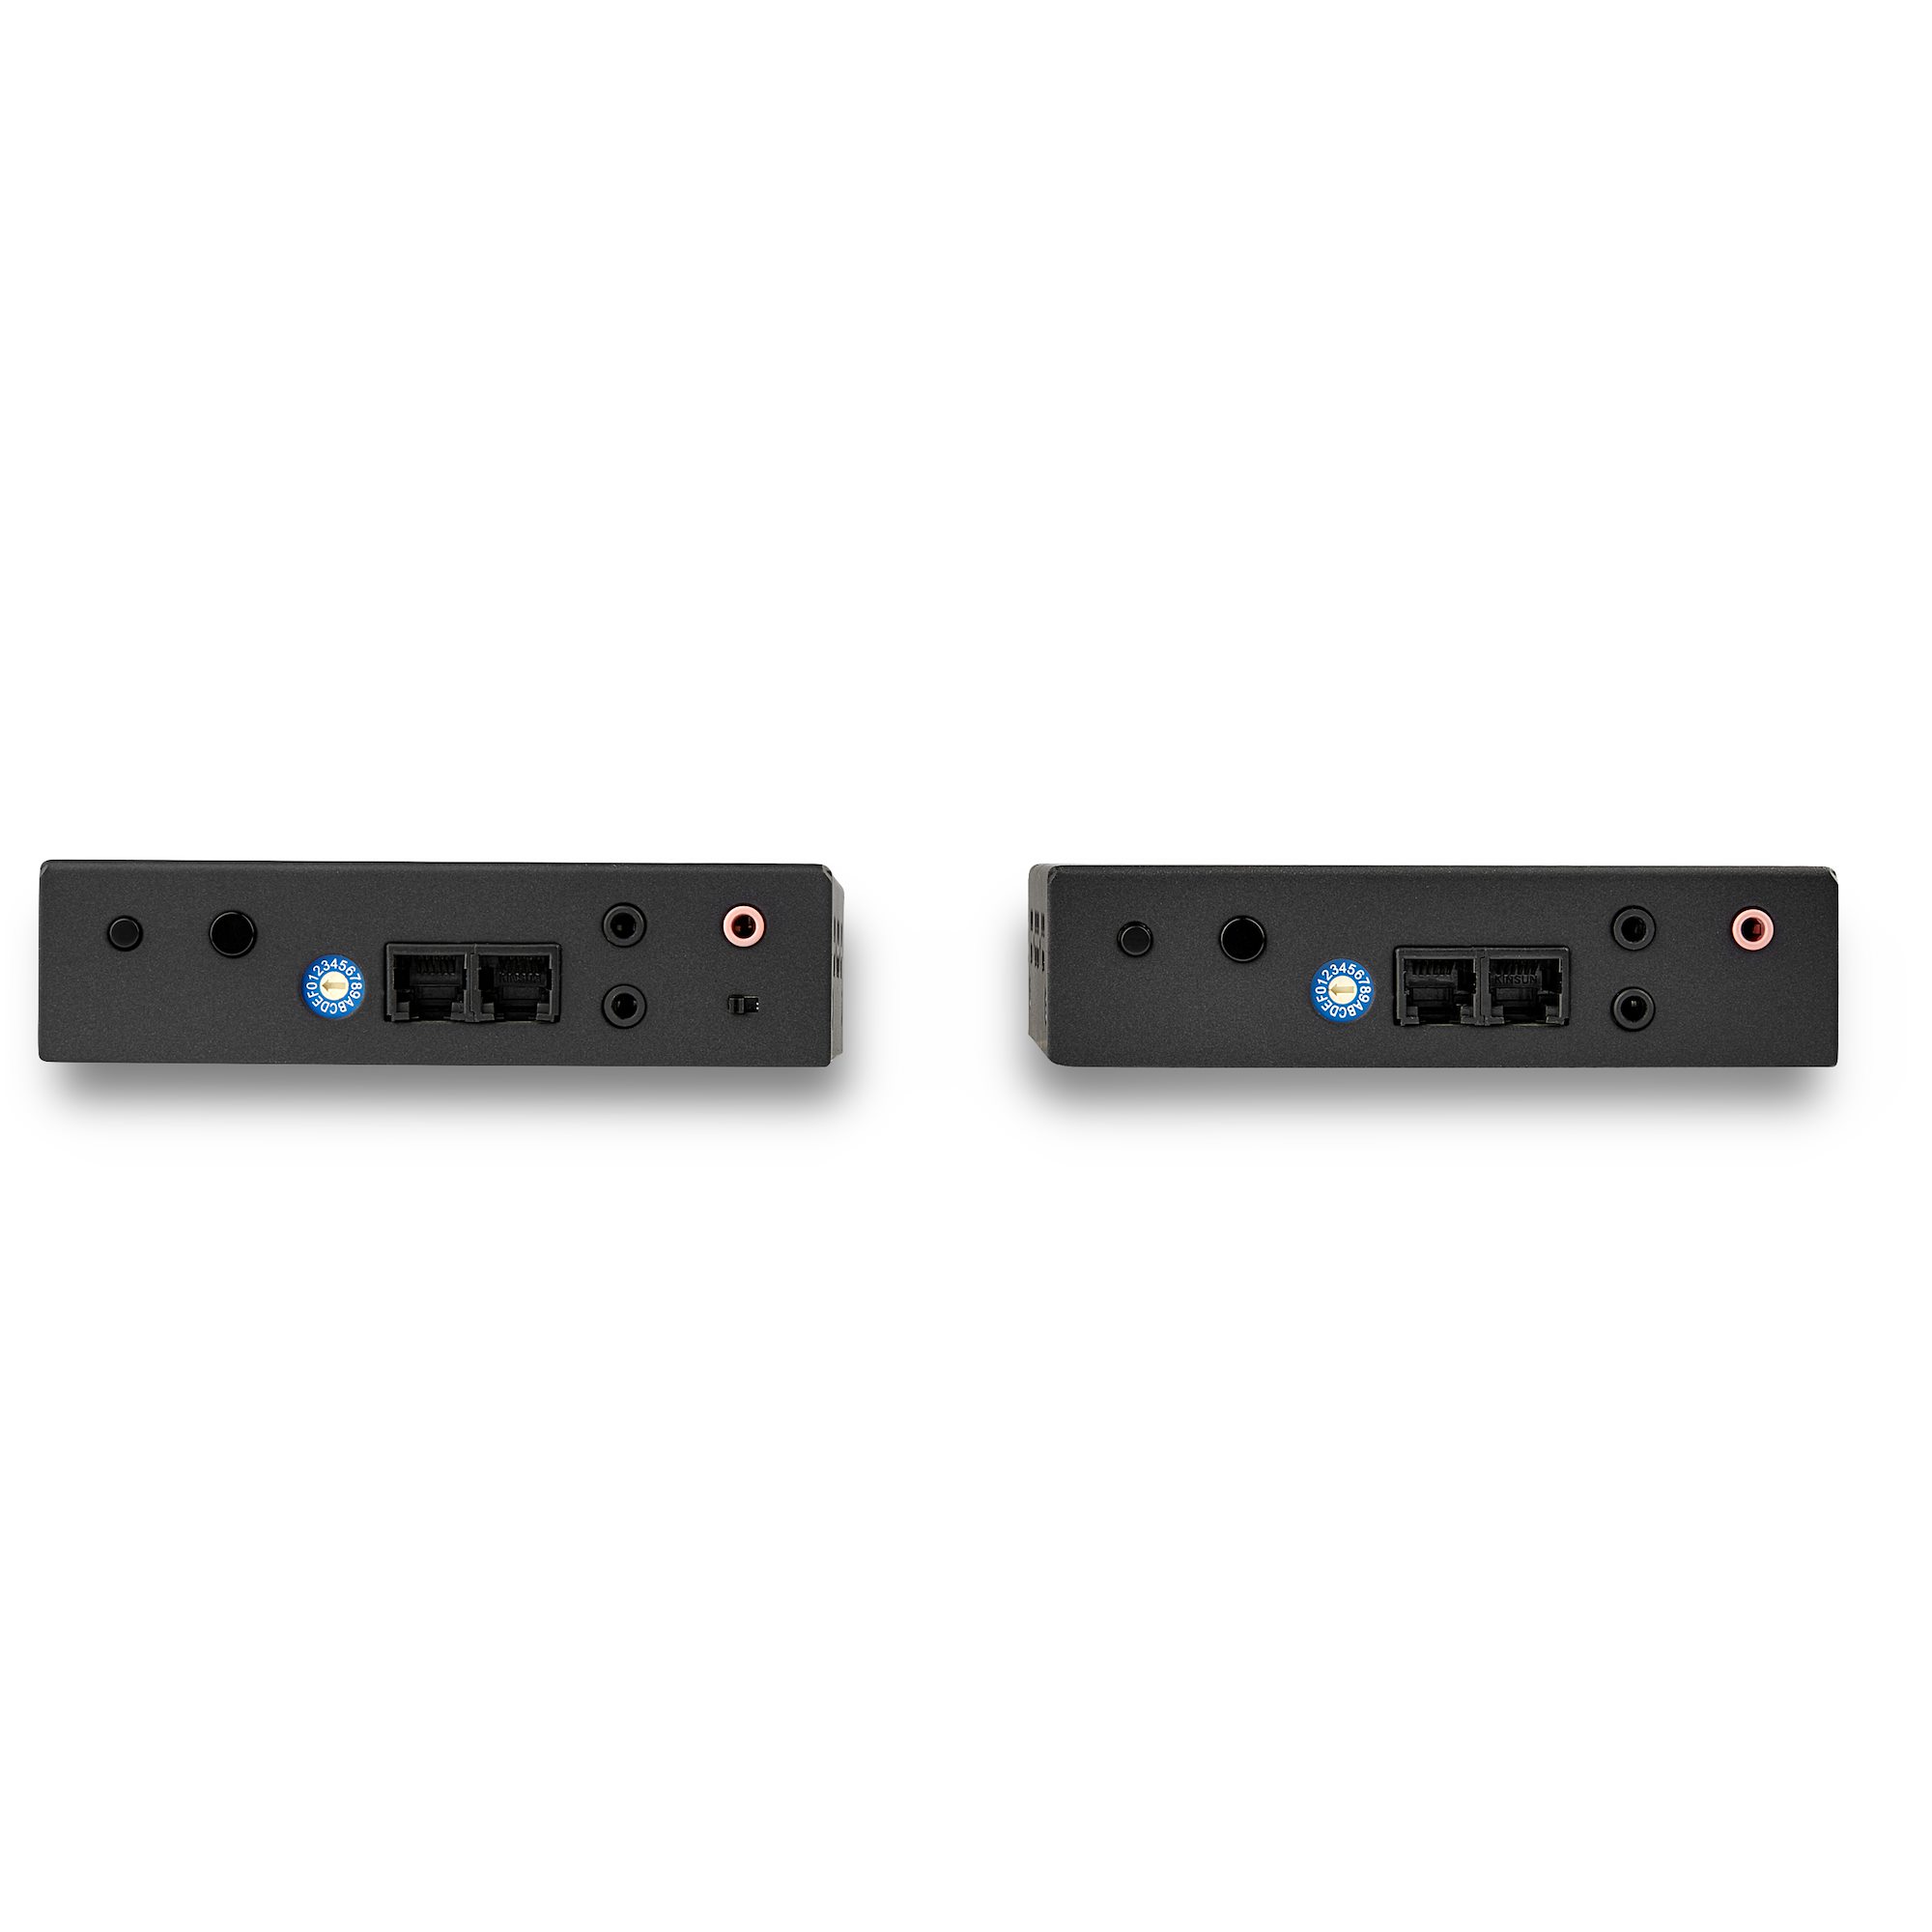 HDMI over IP Extender Kit with Video Wall Support - 1080p